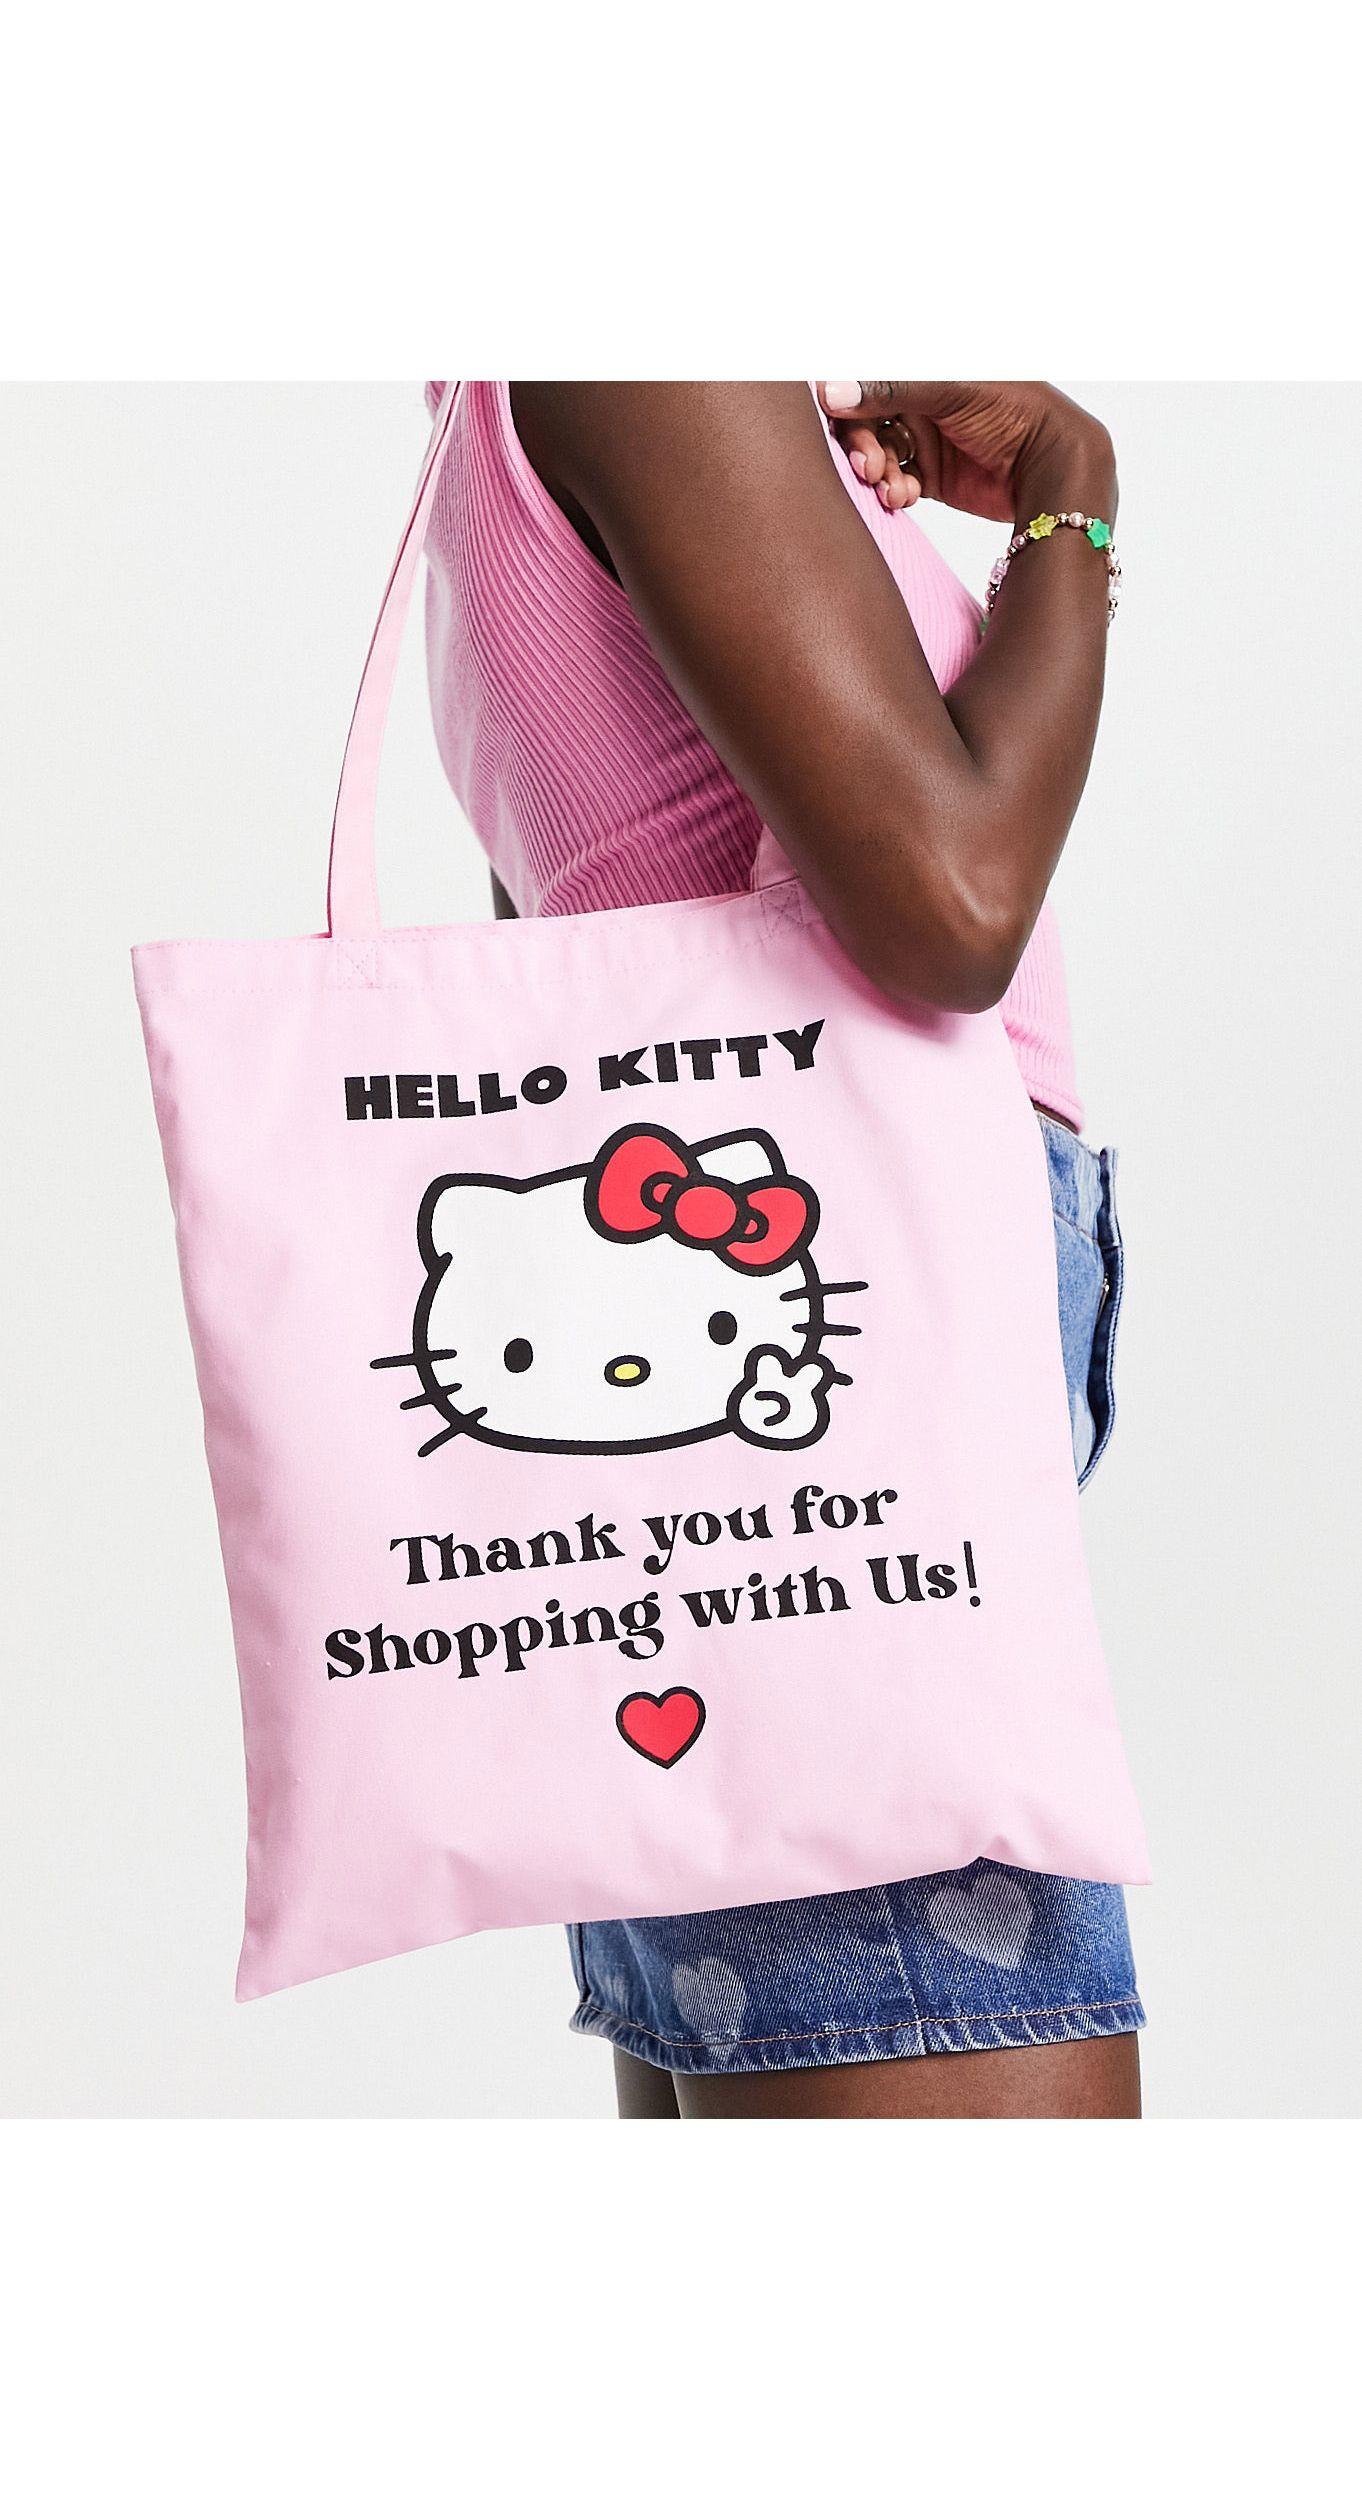 Skinnydip London X Hello Kitty Tote Bag in Pink | Lyst